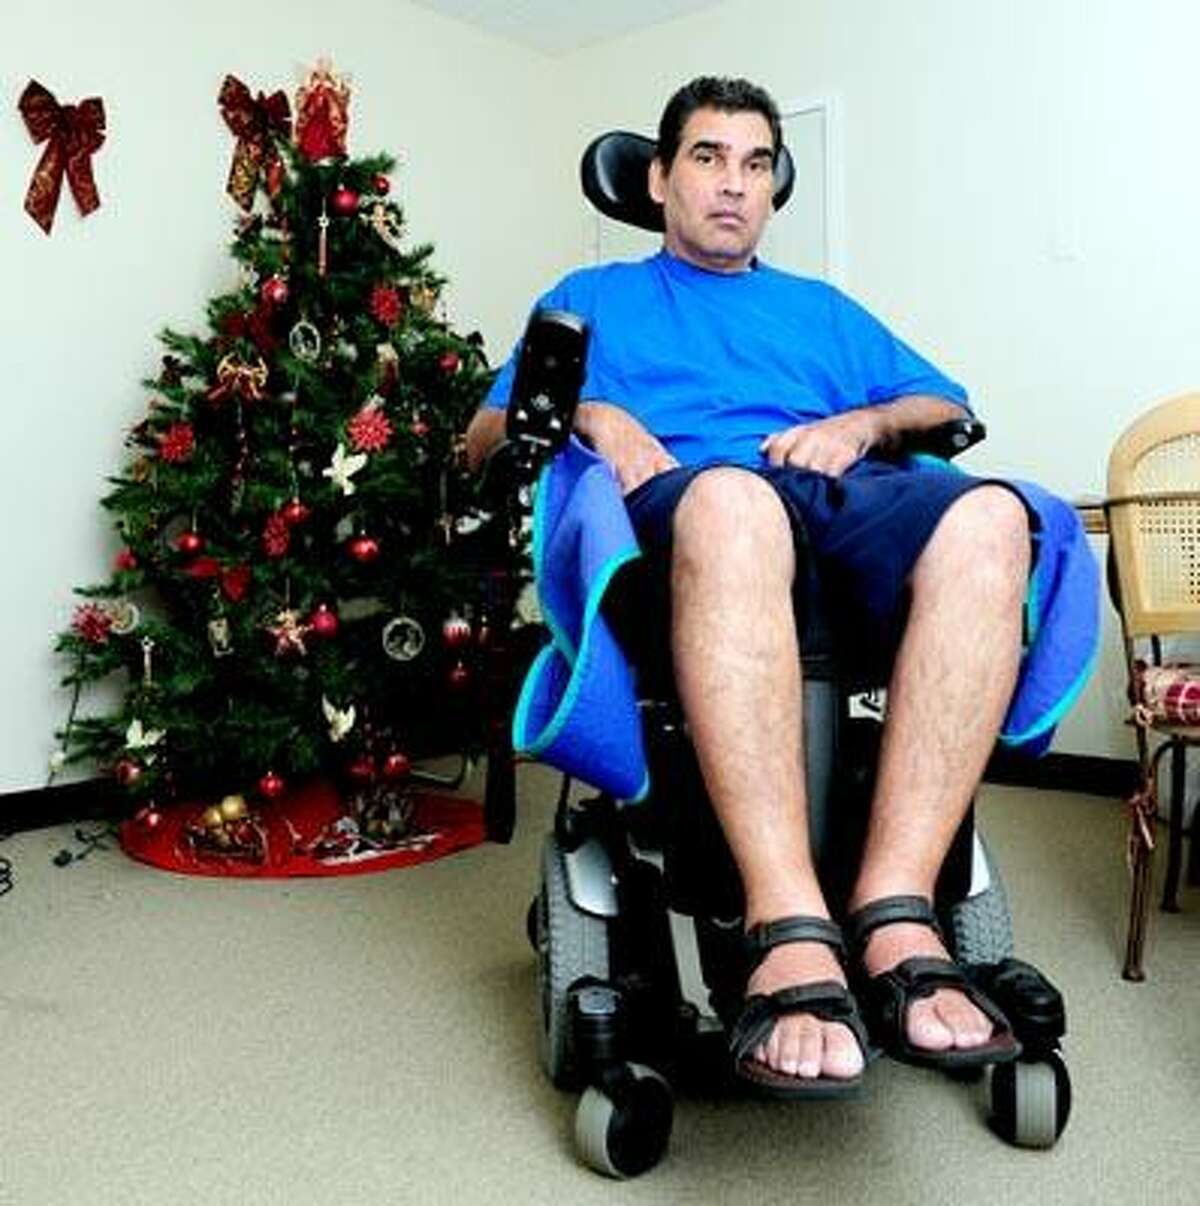 Gilberto Cosme, a victim of Lou Gehrig's disease, sits in the living room of his home on George Street in New Haven Thursday. Thieves stole his handicapped accessible van. (Arnold Gold/Register)